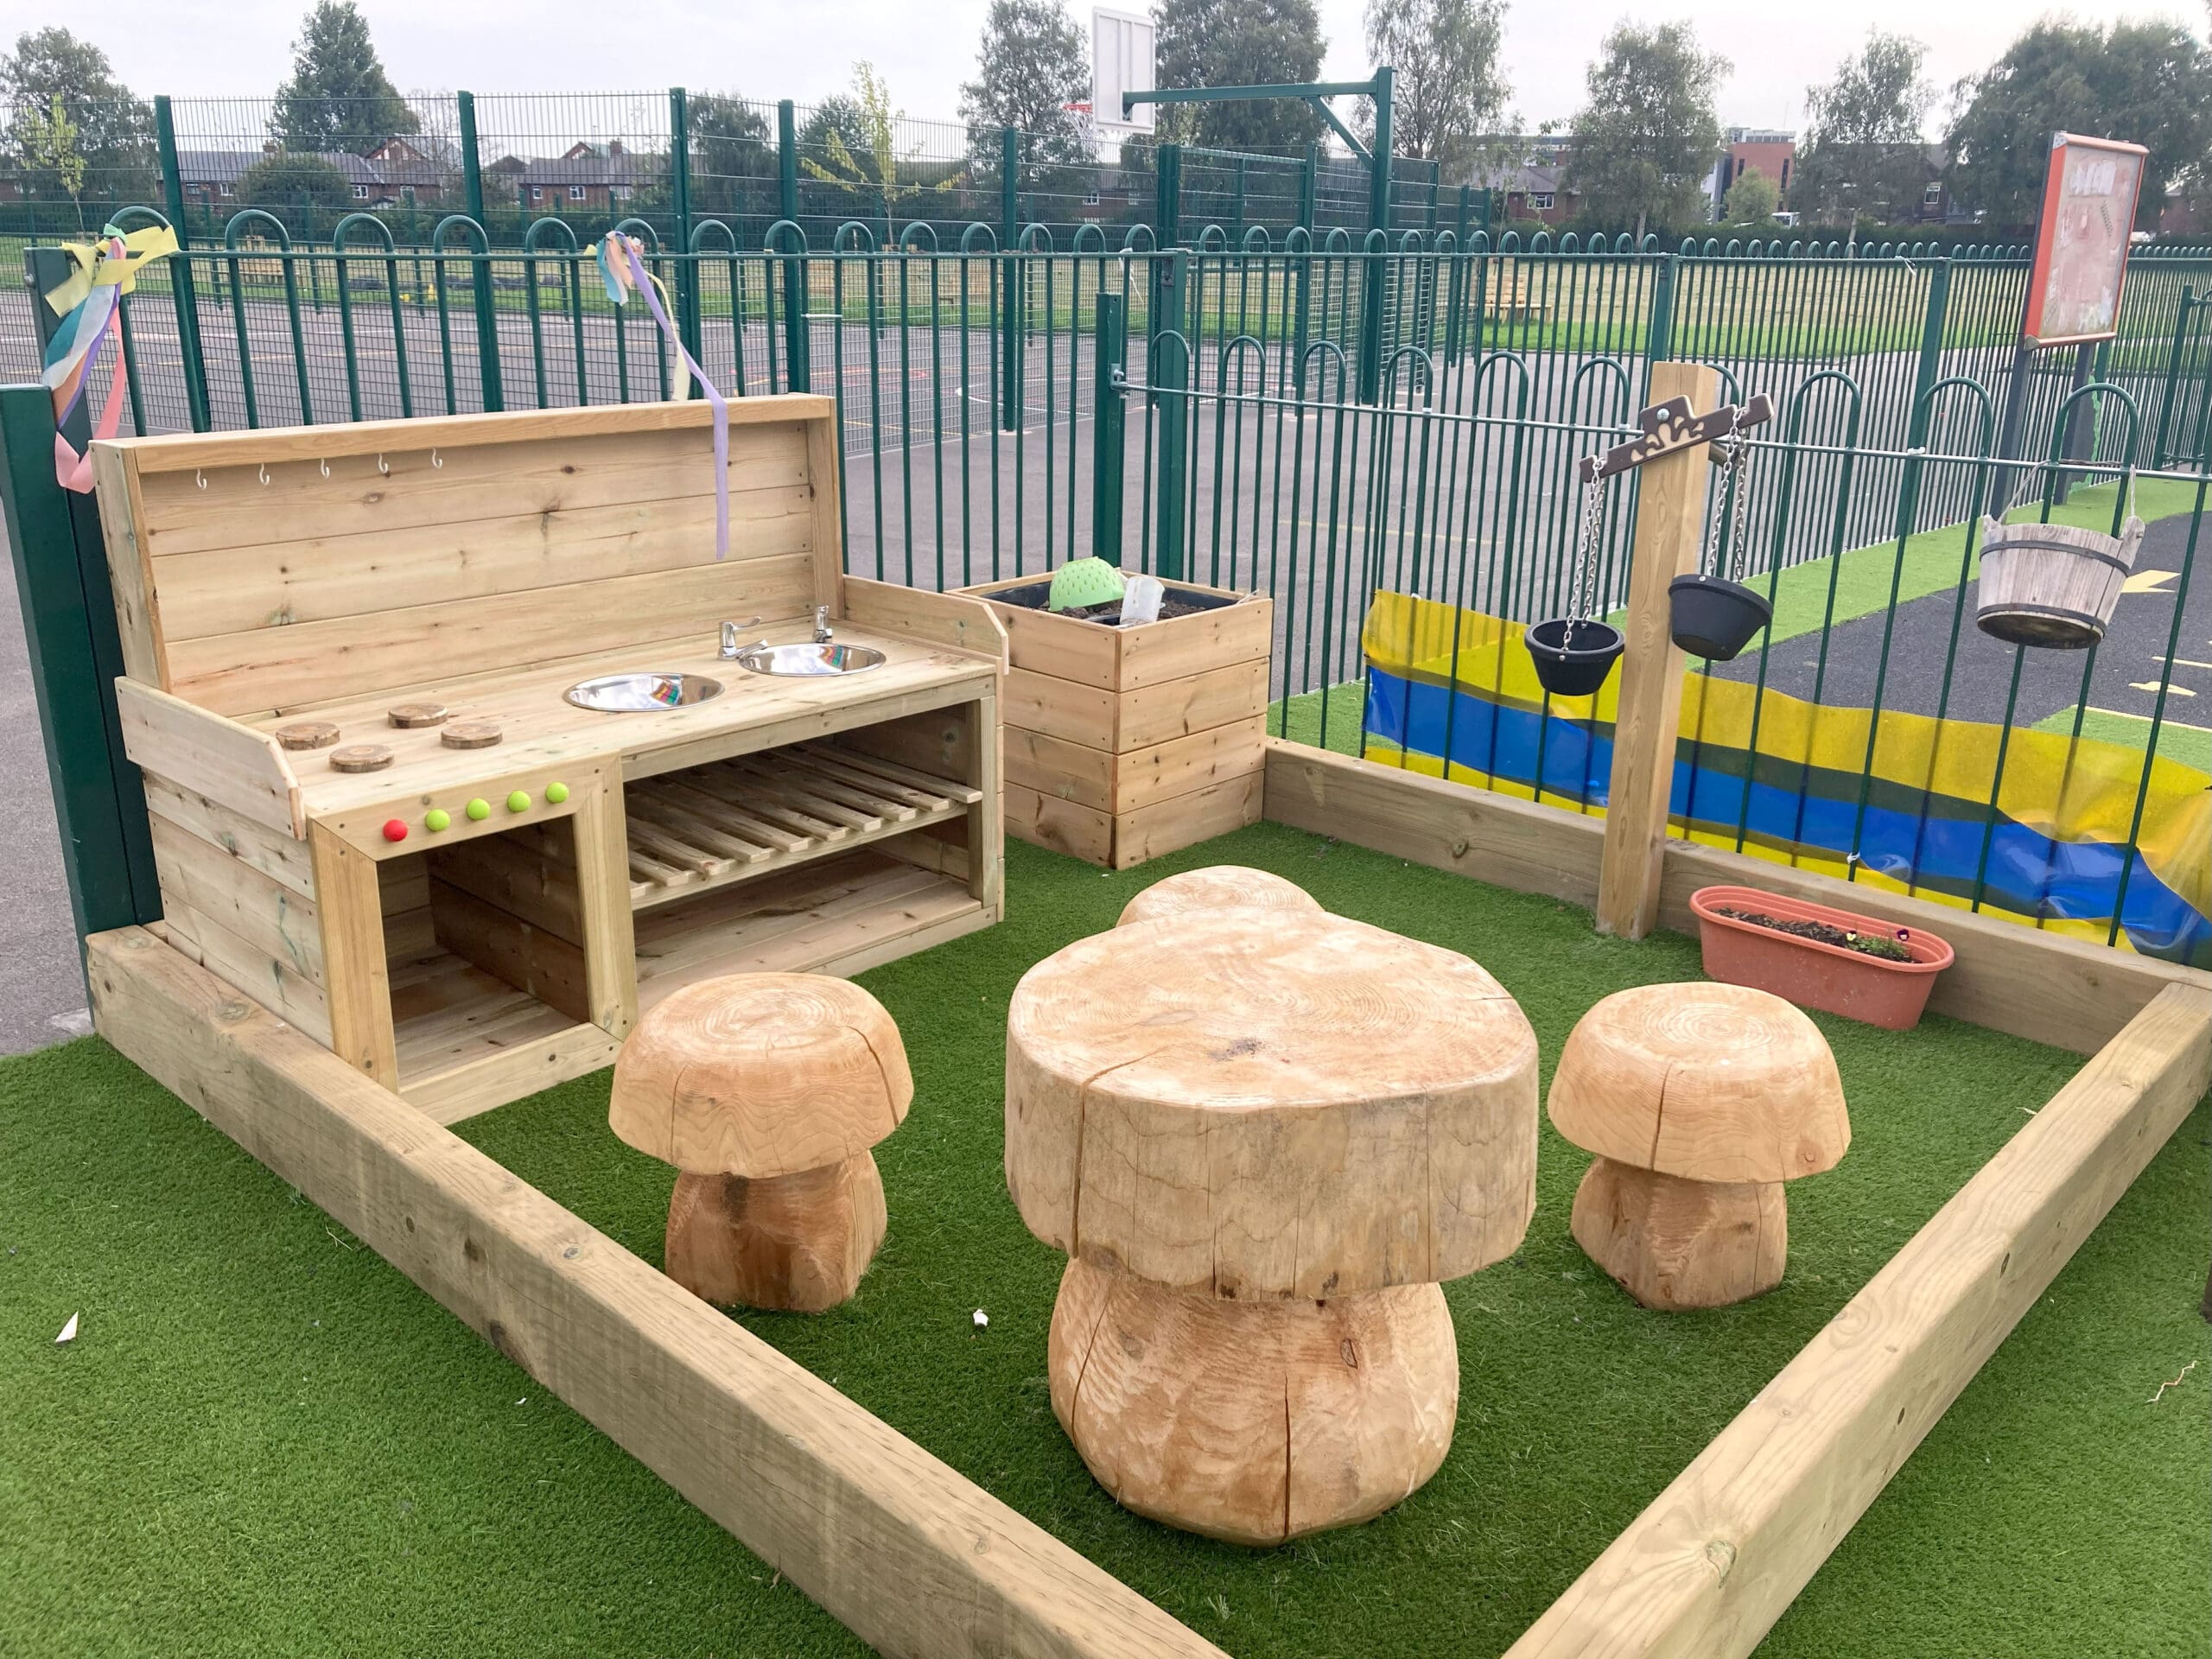 meadowside-primary-messy-play-area